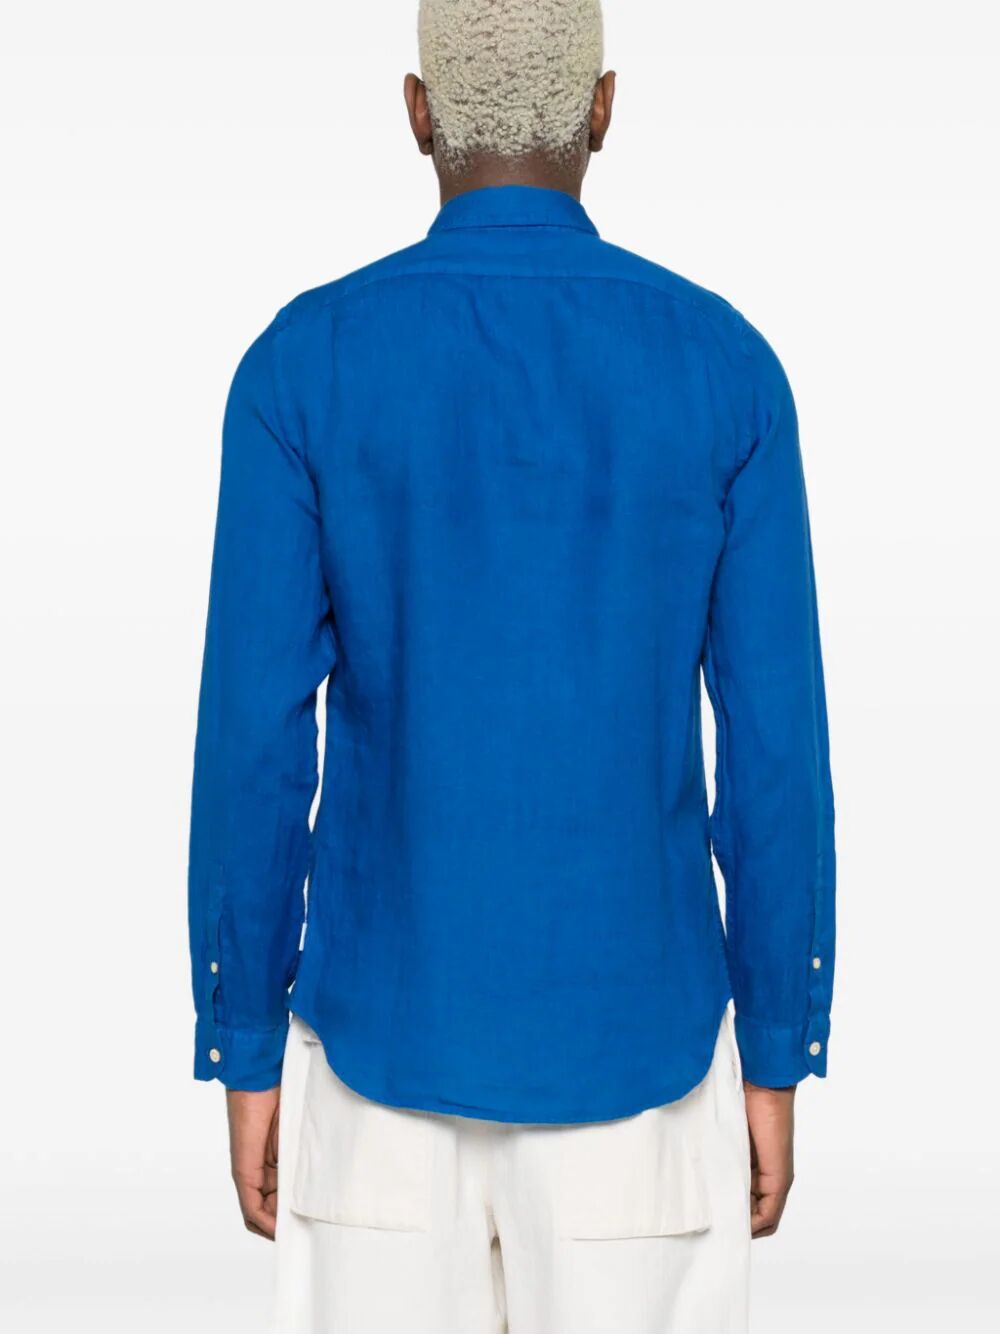 Shop Ps By Paul Smith Mens Ls Tailored Fit Shirt In Blue